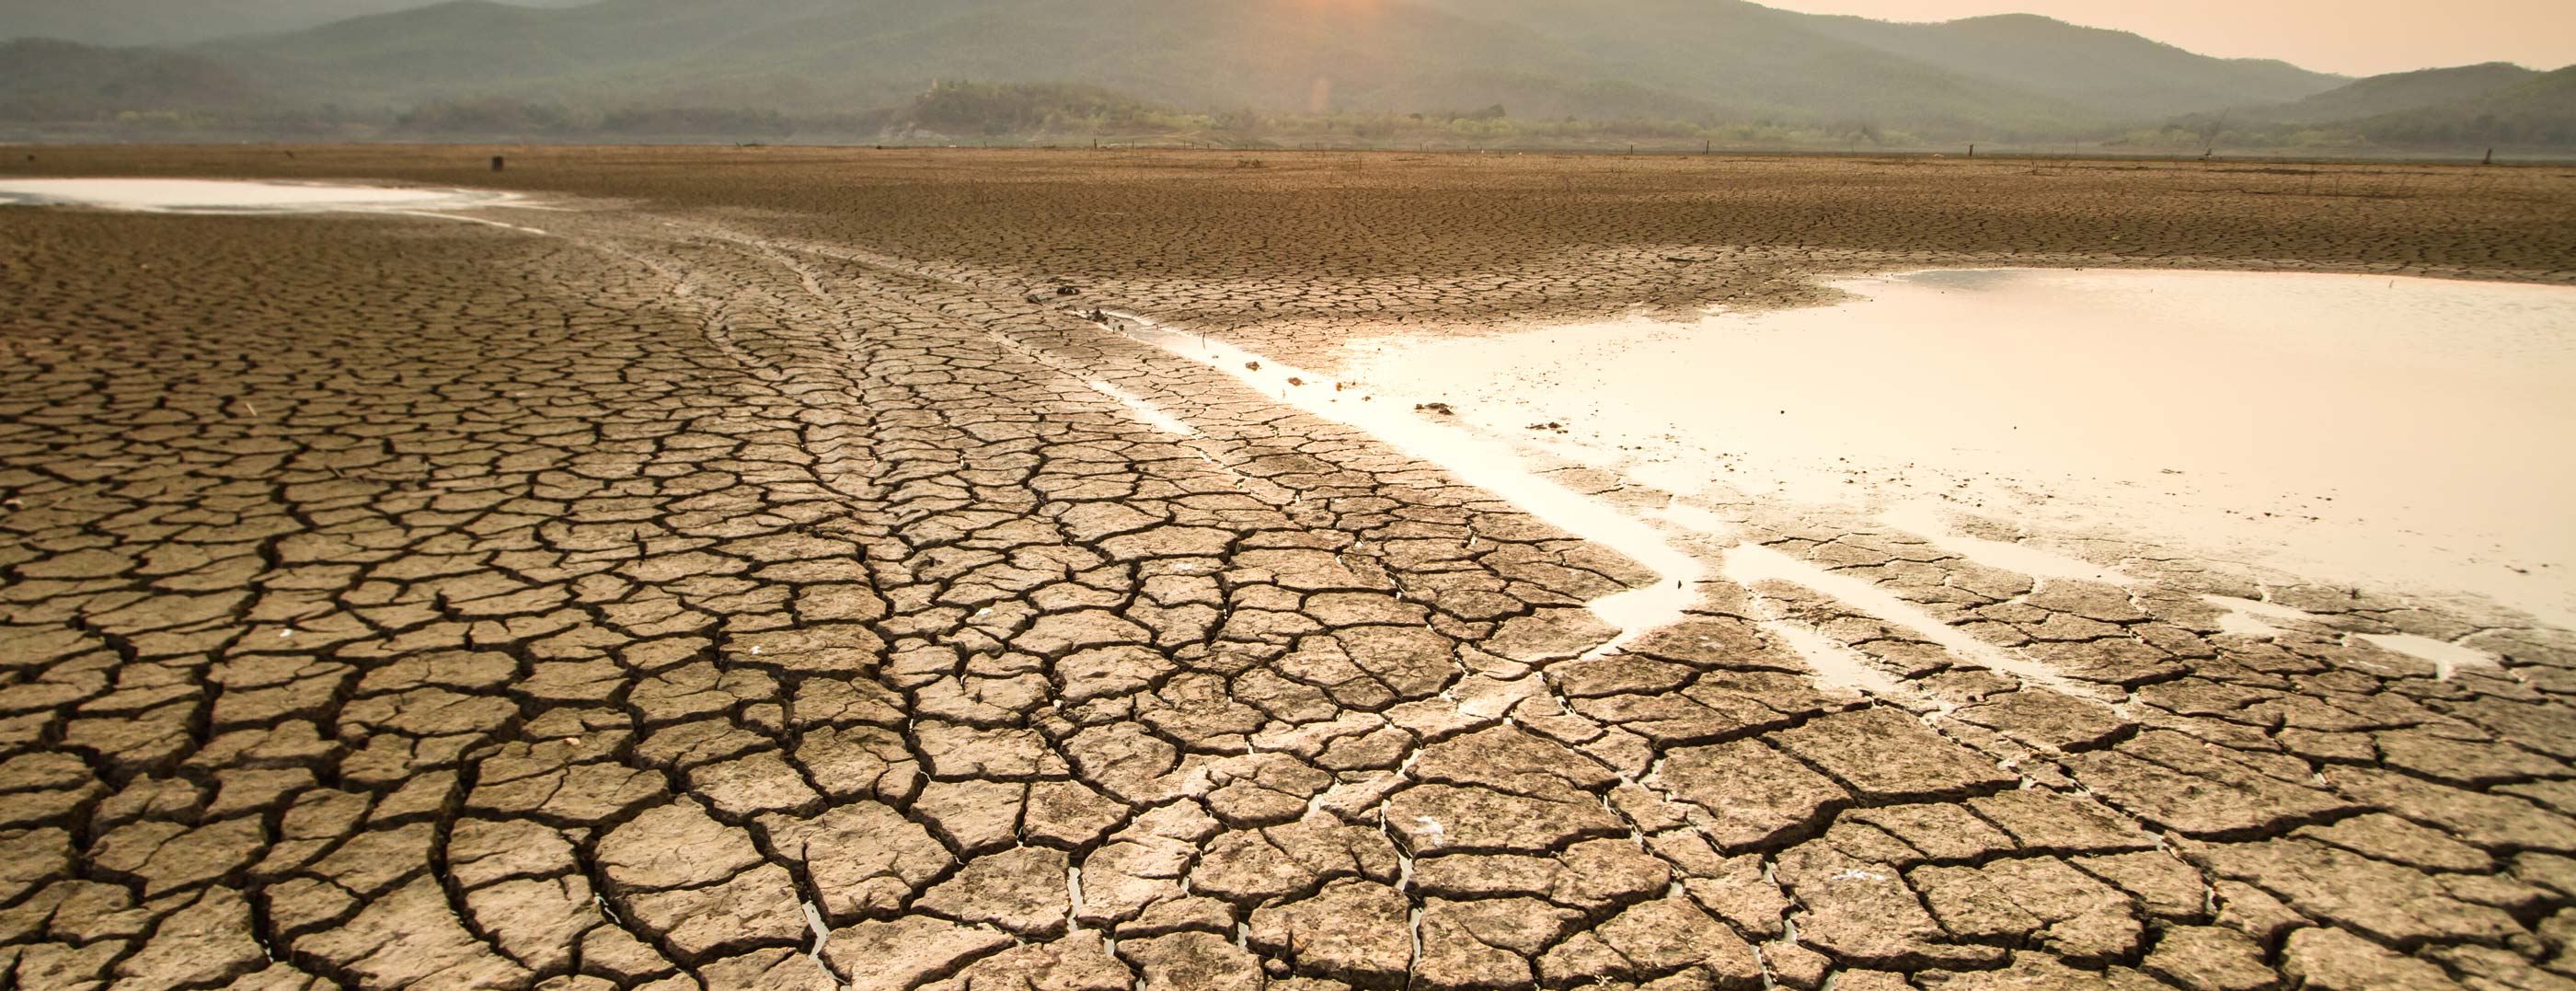 A drying lake with cracked soil